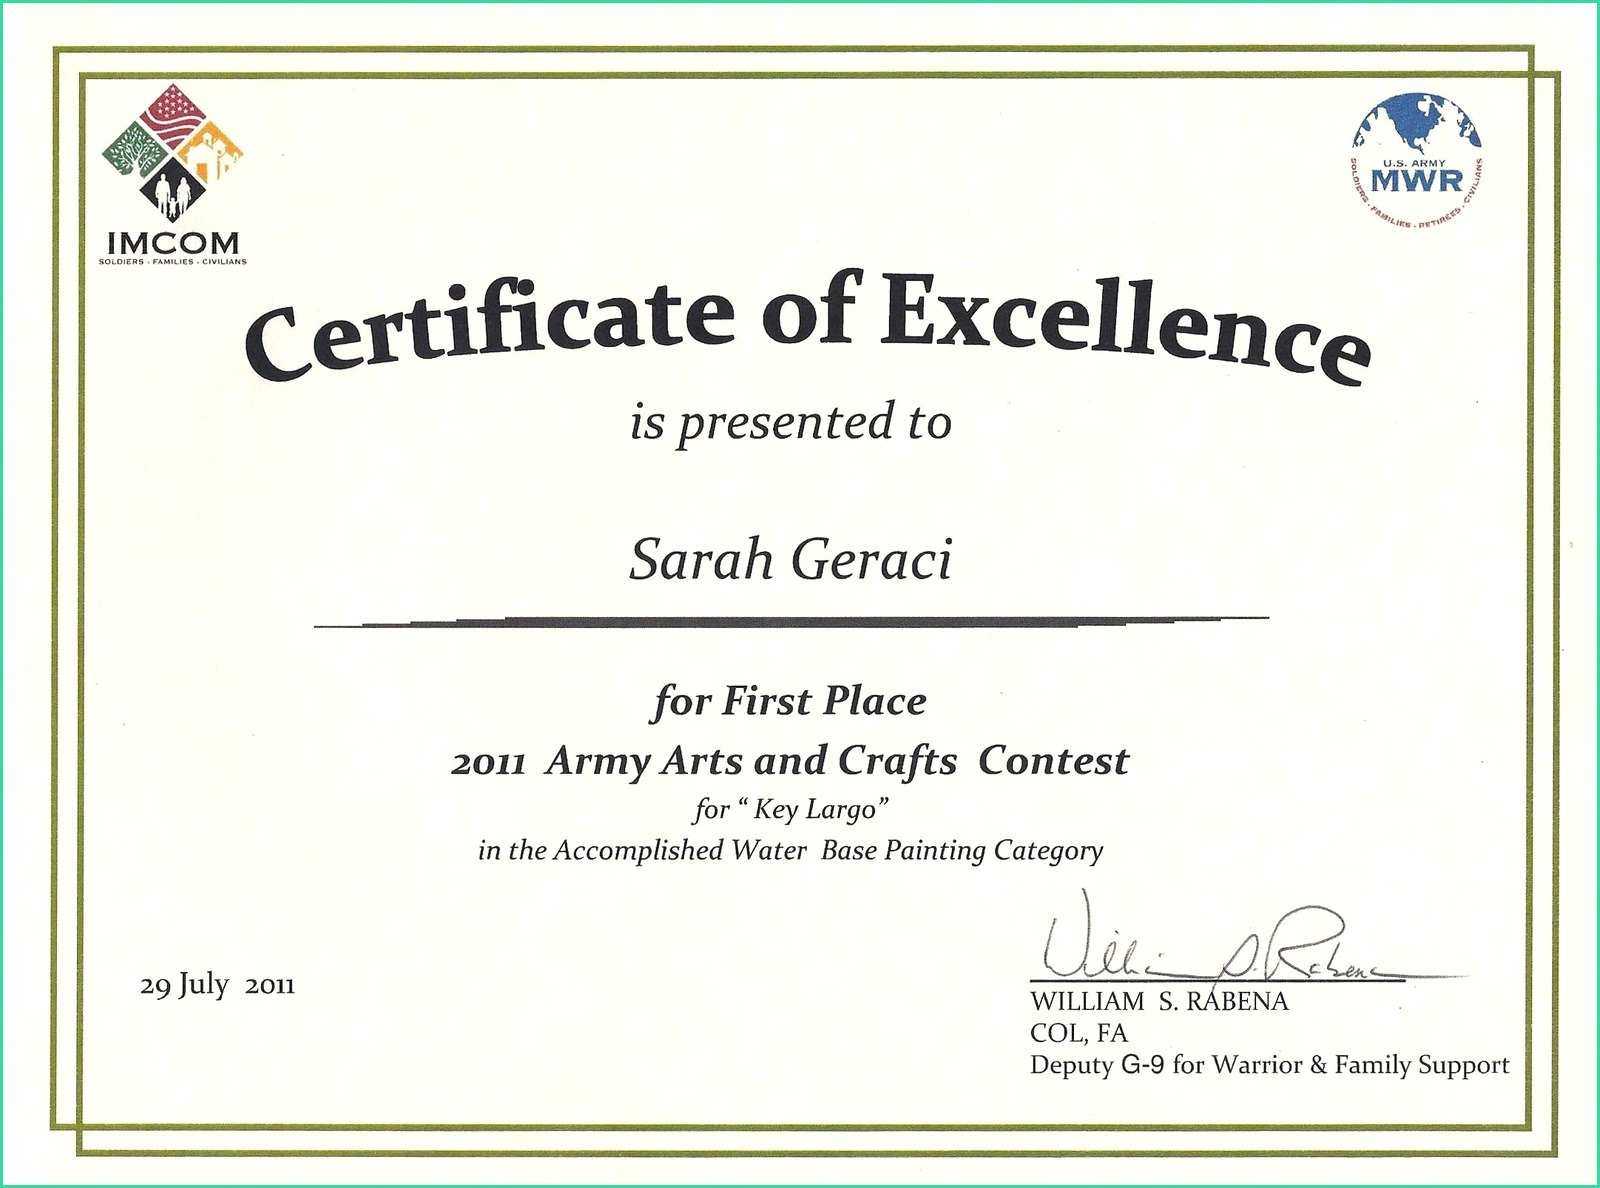 1St 2Nd 3Rd Place Certificate Template Templates First Award Within First Place Award Certificate Template